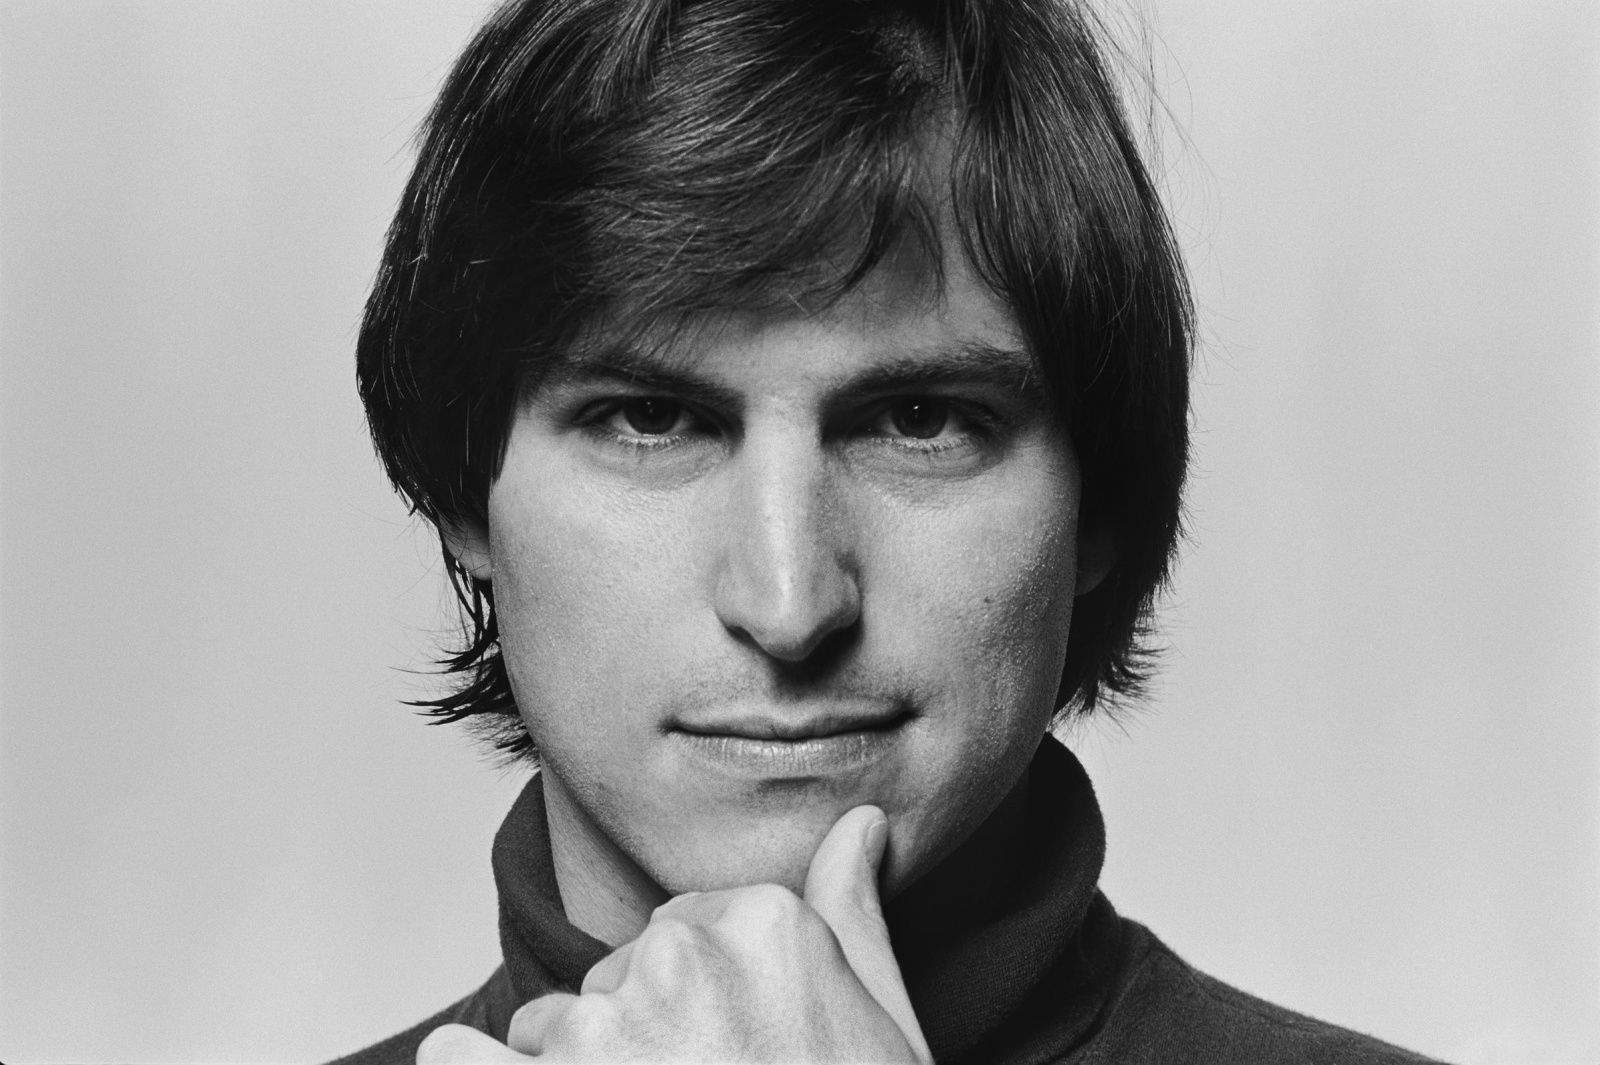 What was it really like to work for Steve Jobs?